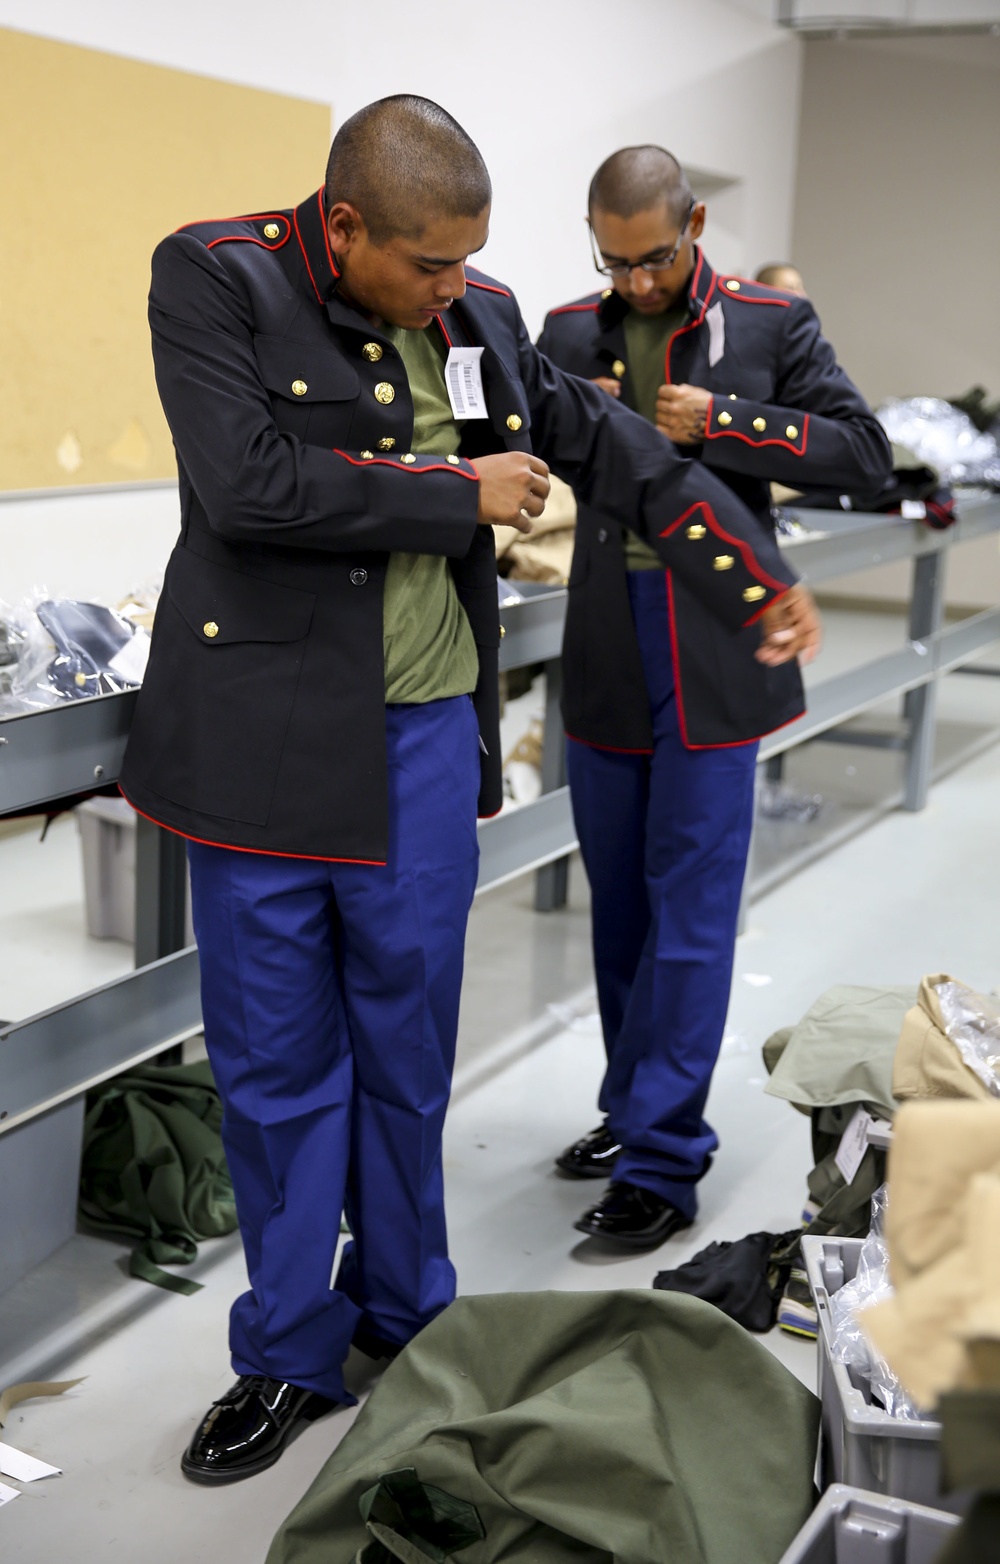 Recruits of Delta Company attend their first uniform fitting